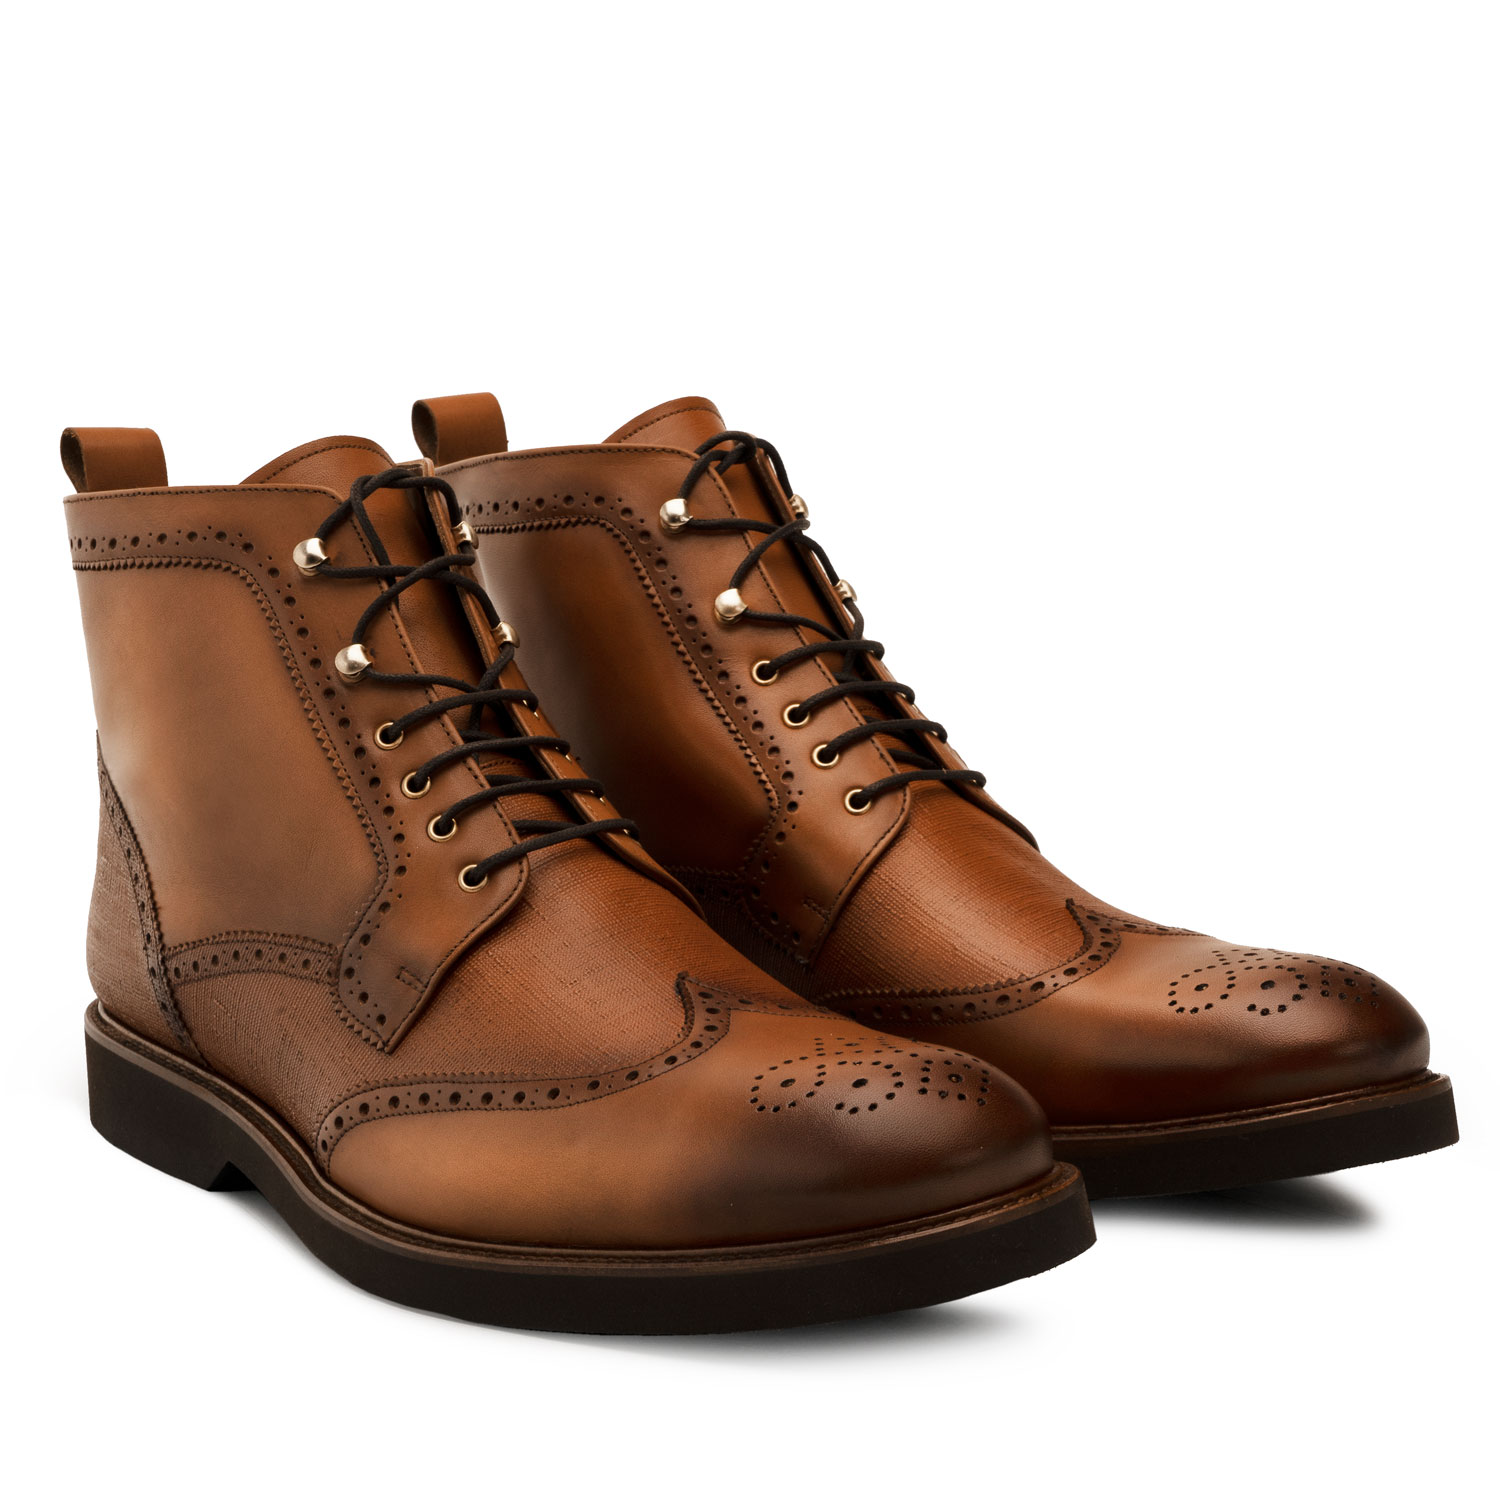 Wingtip Boots in Brown Leather 